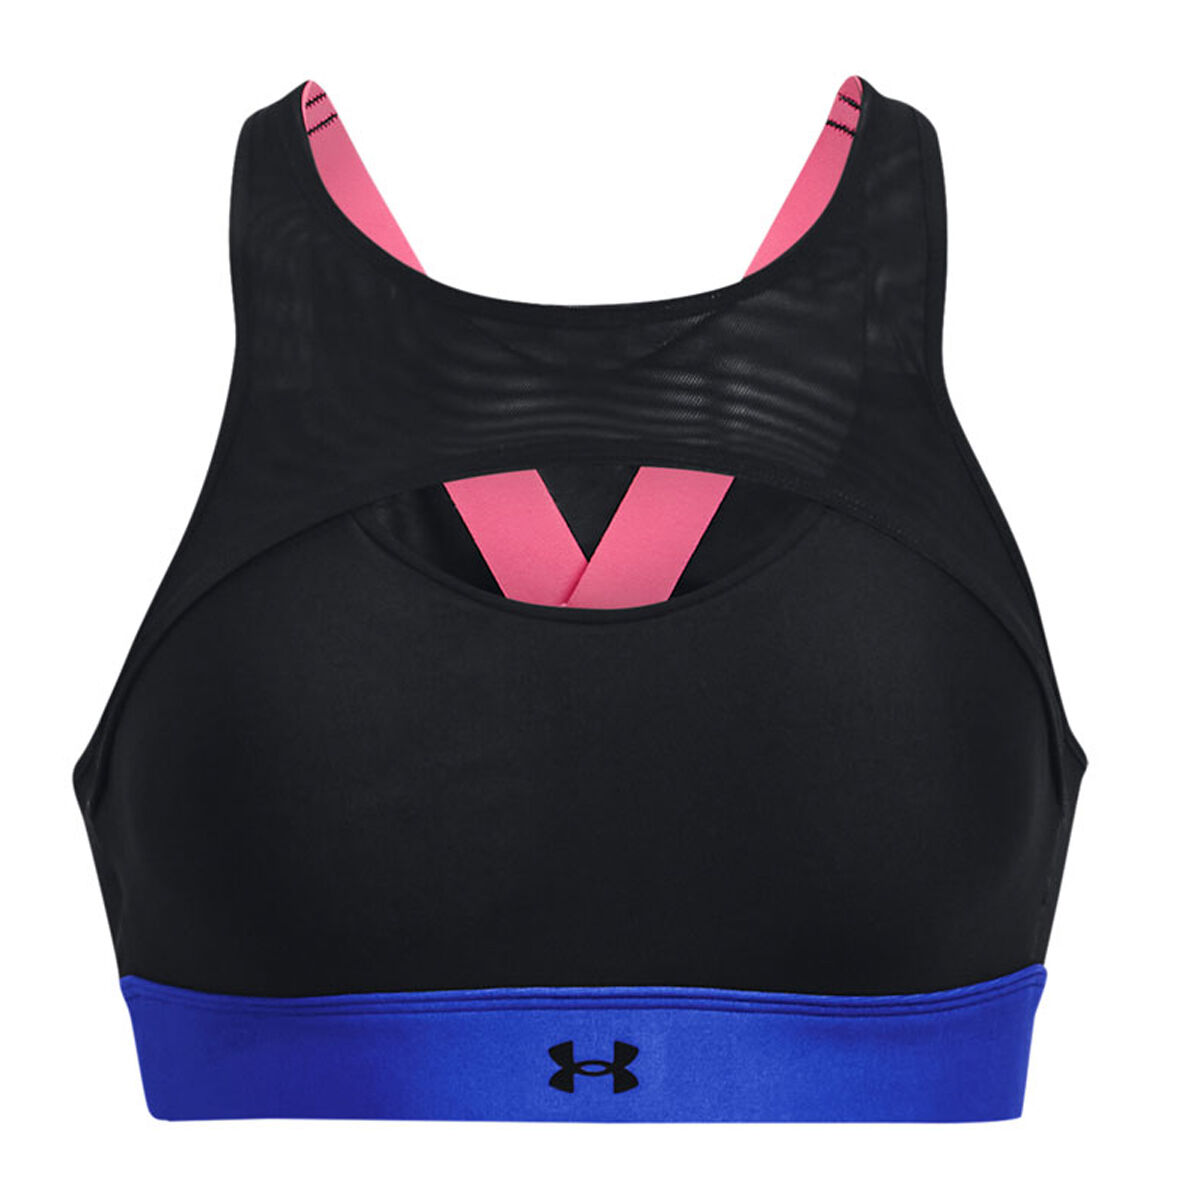 rebel sport - The Under Armour Infinity sports bra is a